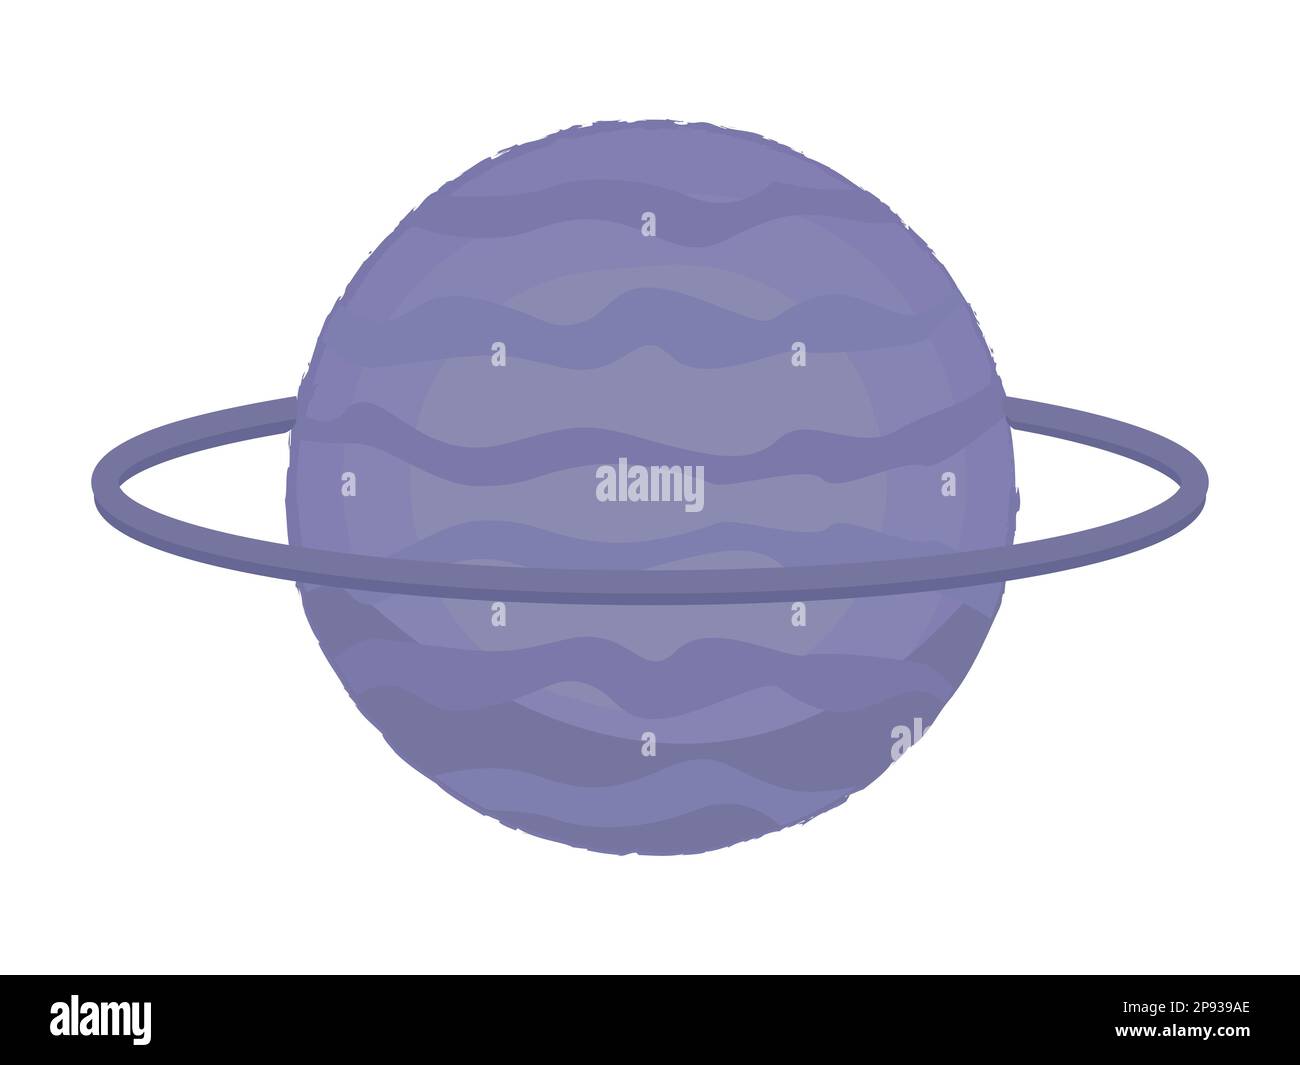 Grey planet with a ring, monochrome illustration Stock Vector